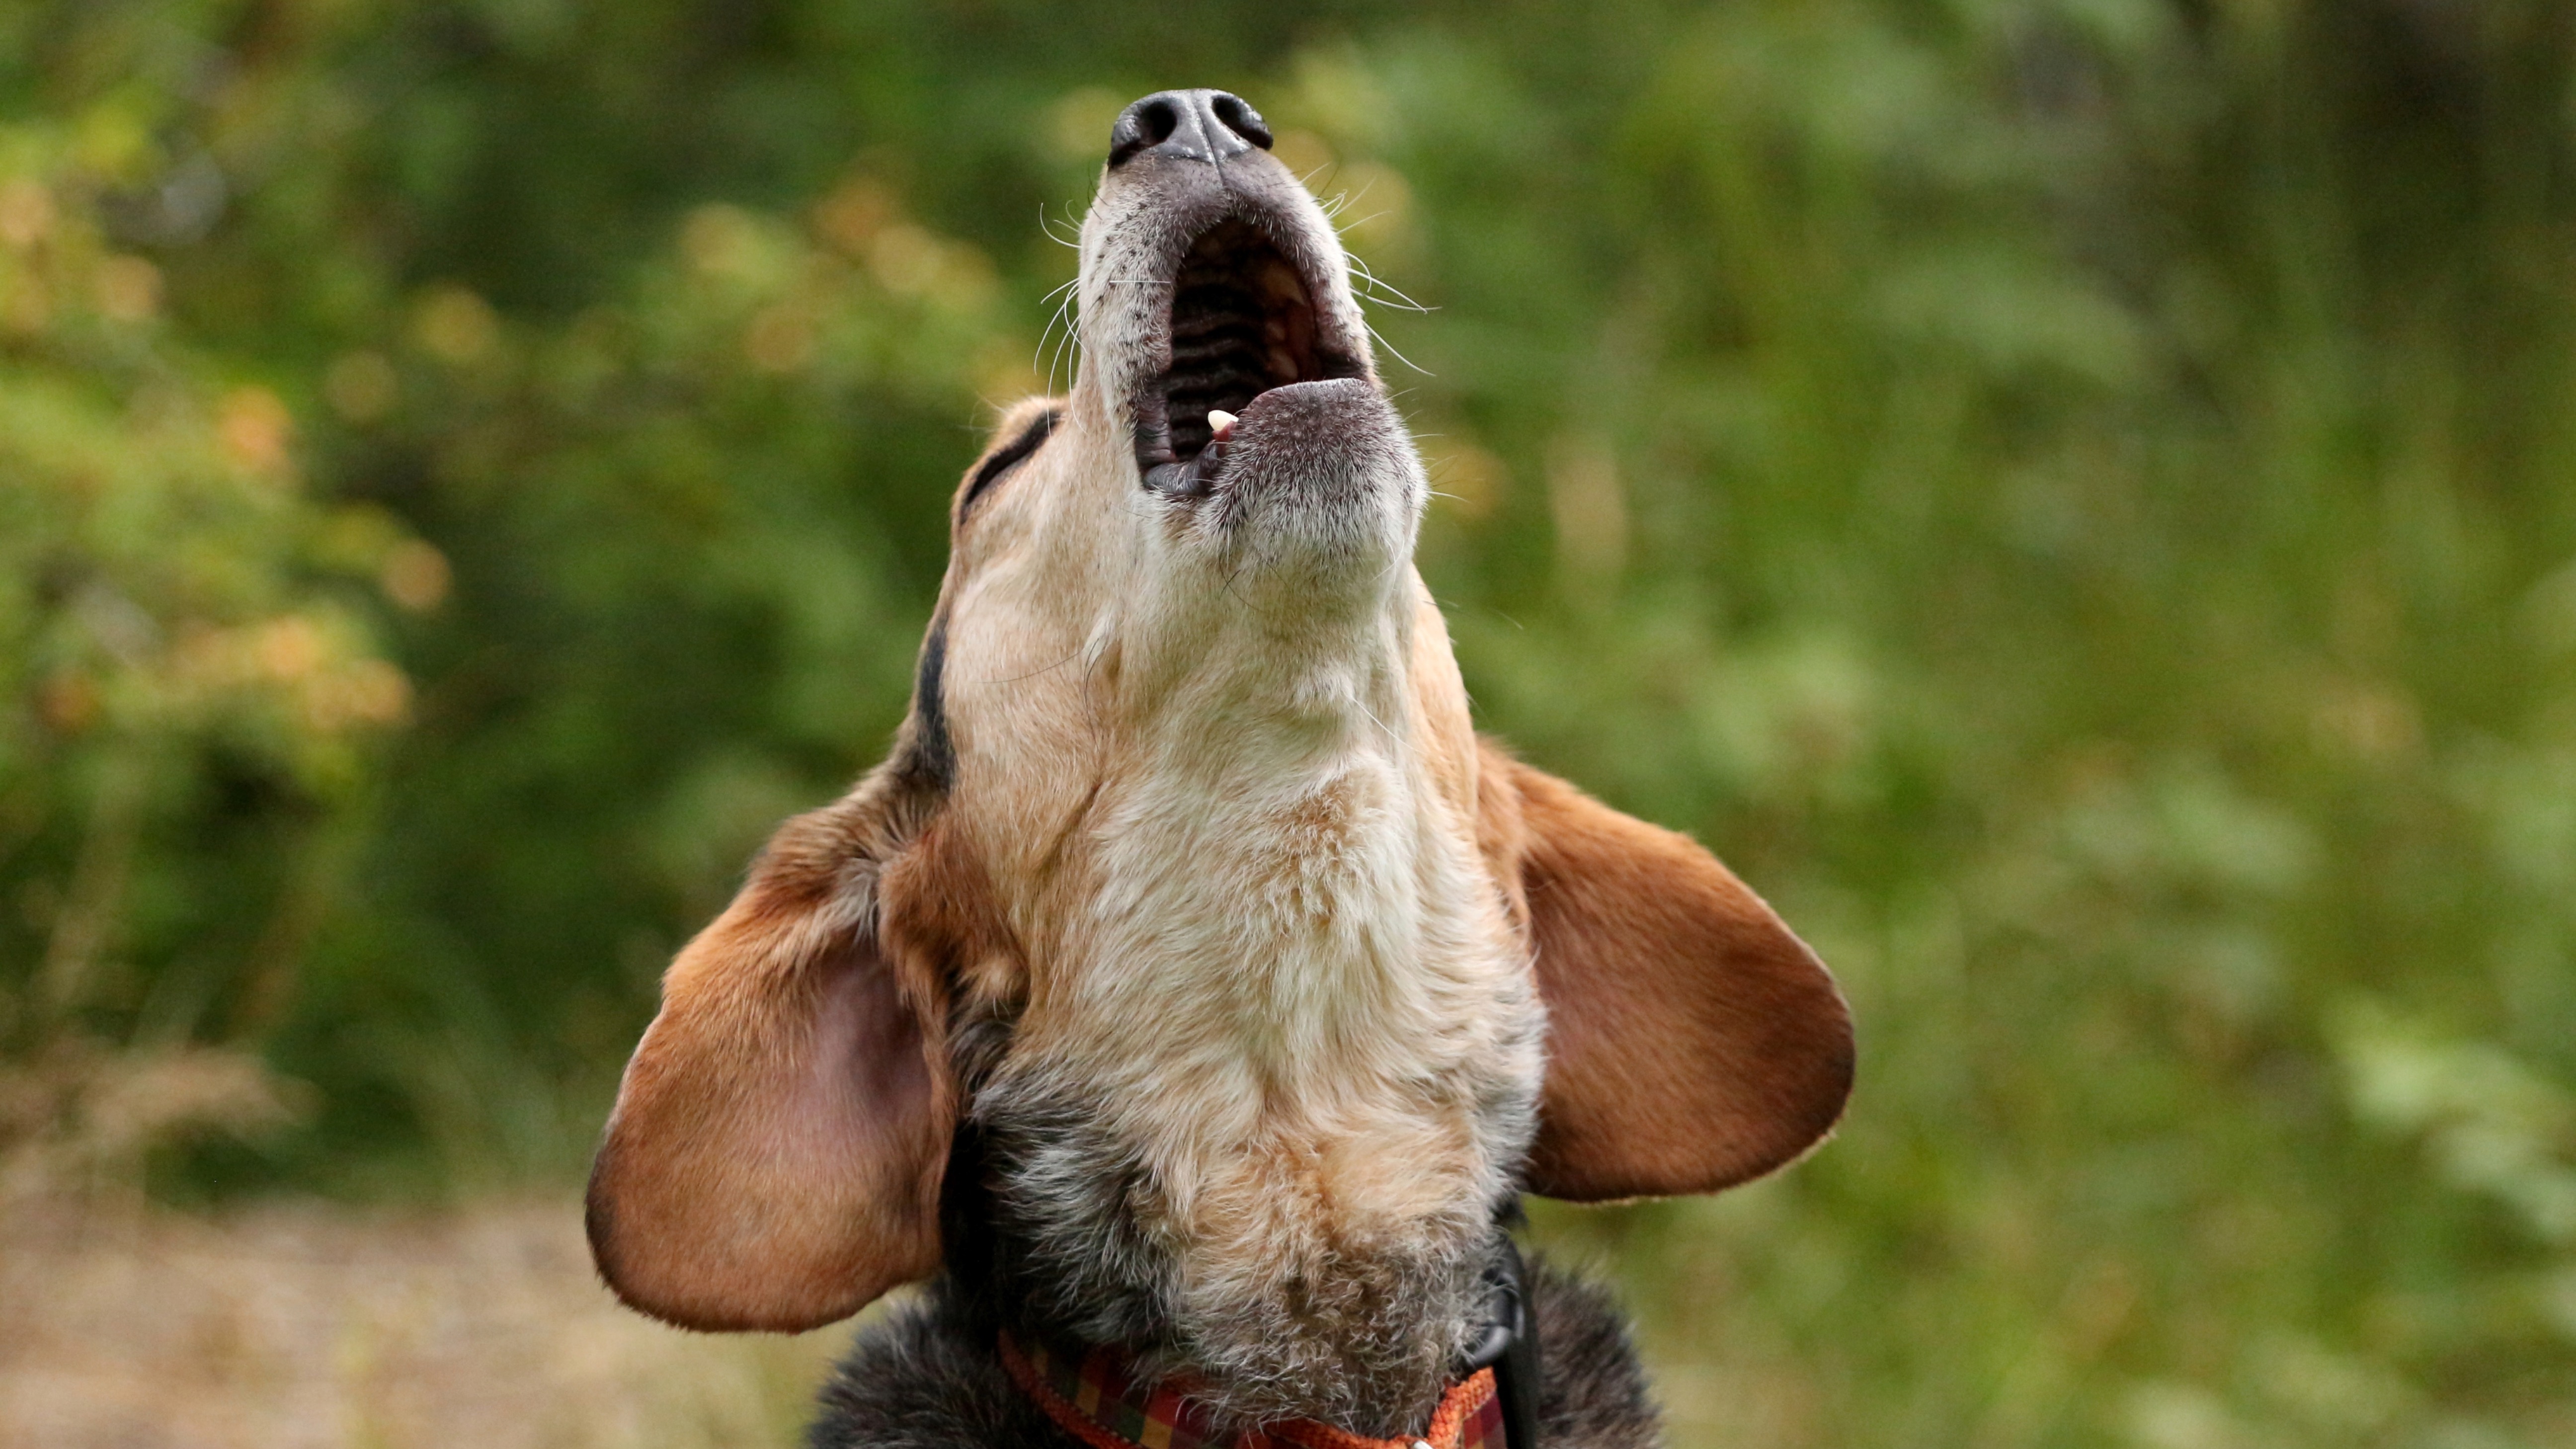 Six reasons why it's completely normal to be bothered by your dog’s barking